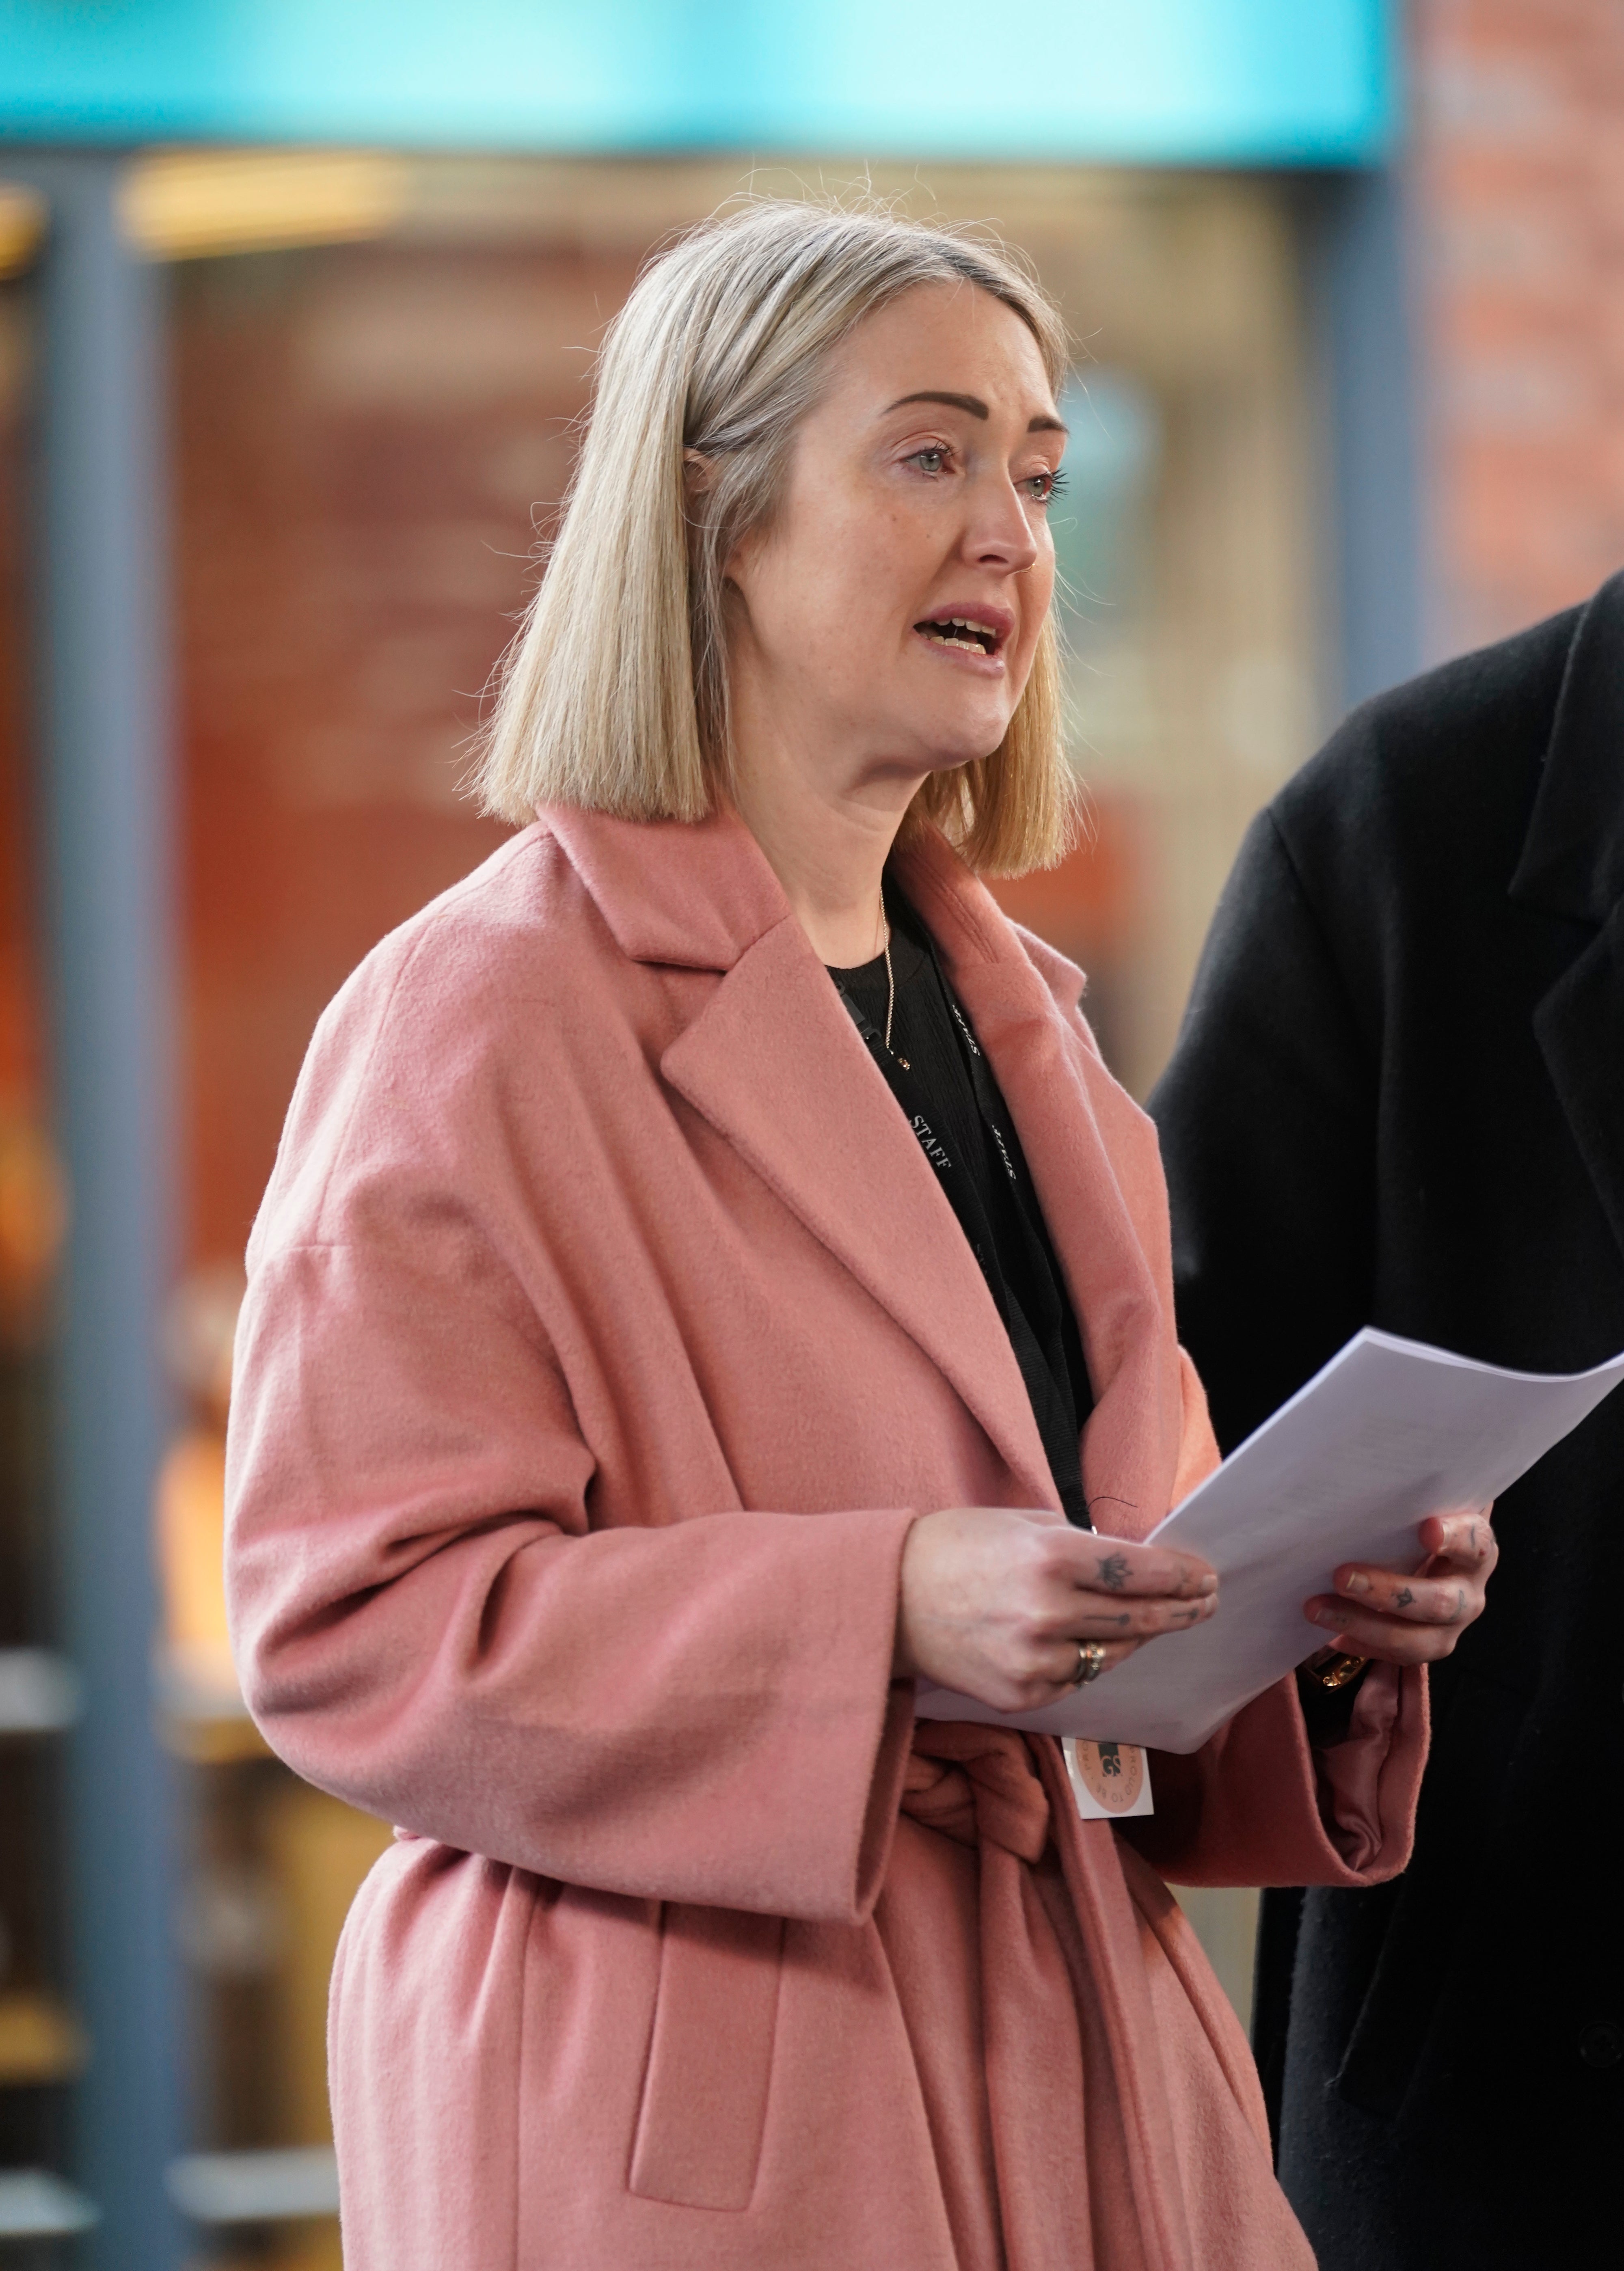 Esther Ghey, the mother of murdered 16-year-old Brianna Ghey, speaking at a vigil in Golden Square, Warrington, to mark the first anniversary of her daughter's death